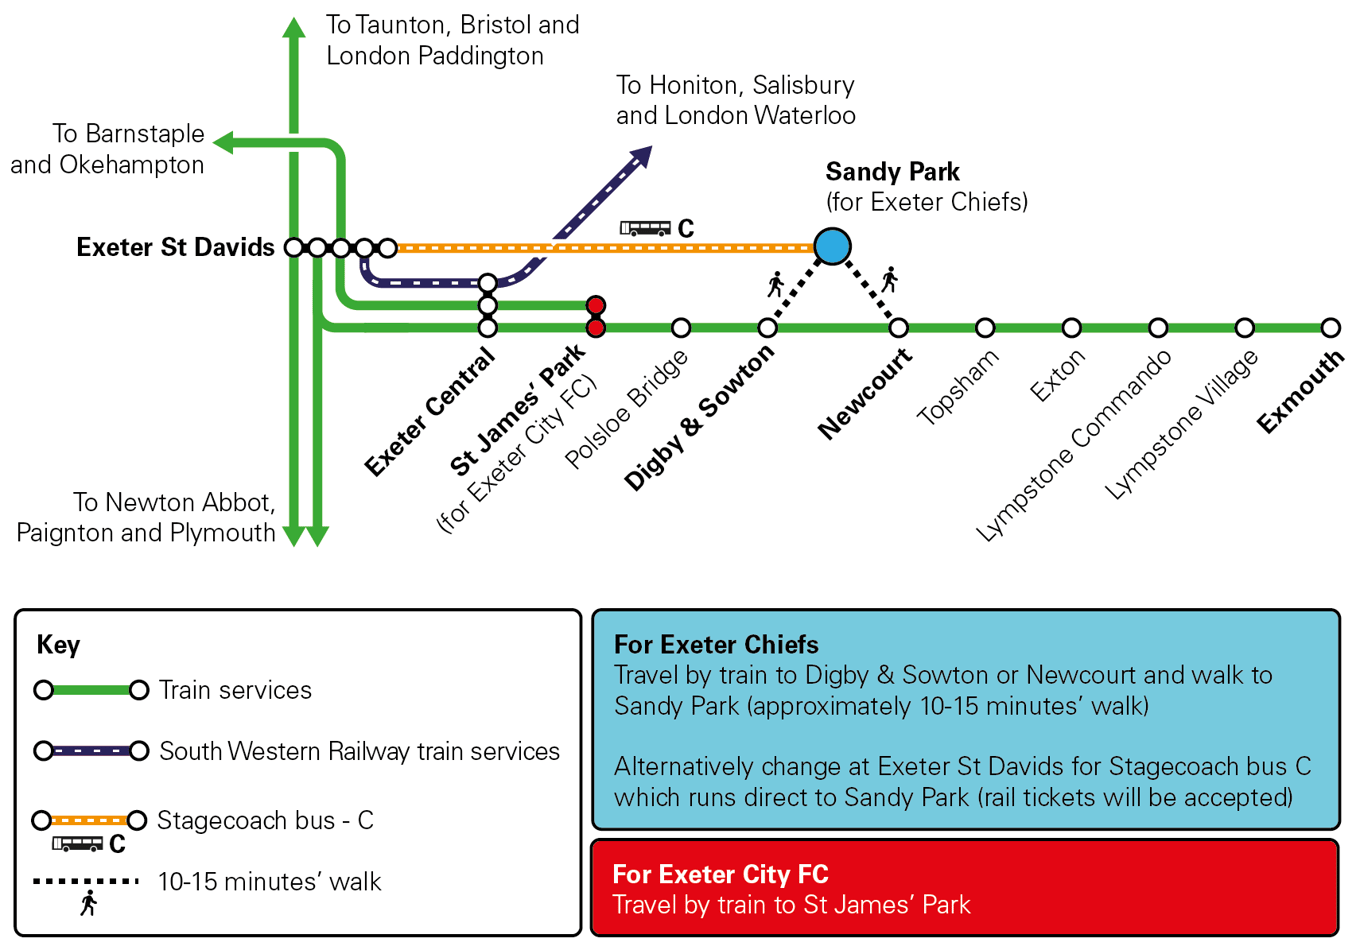 exeter chiefs and city map v2.png